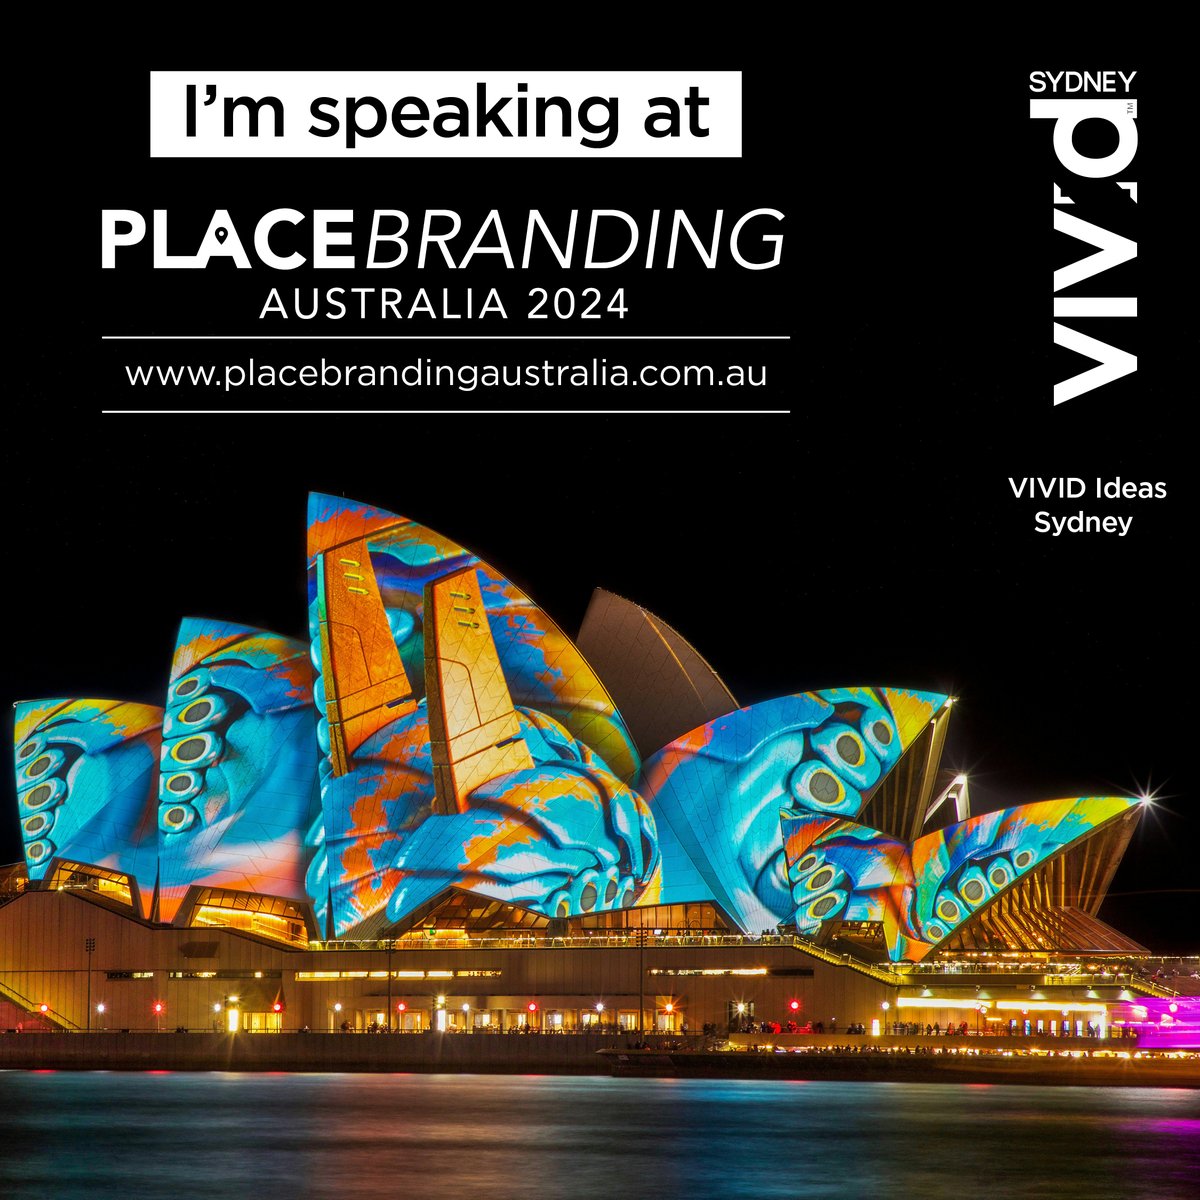 Fantastic to be speaking at Place Branding Australia this June. The Tourism Fiji #brand work has been noticed globally and its great to share the story of the careful & respectful crafting of our brand that we take to the world. If you're in Aus, book in, its a great program!